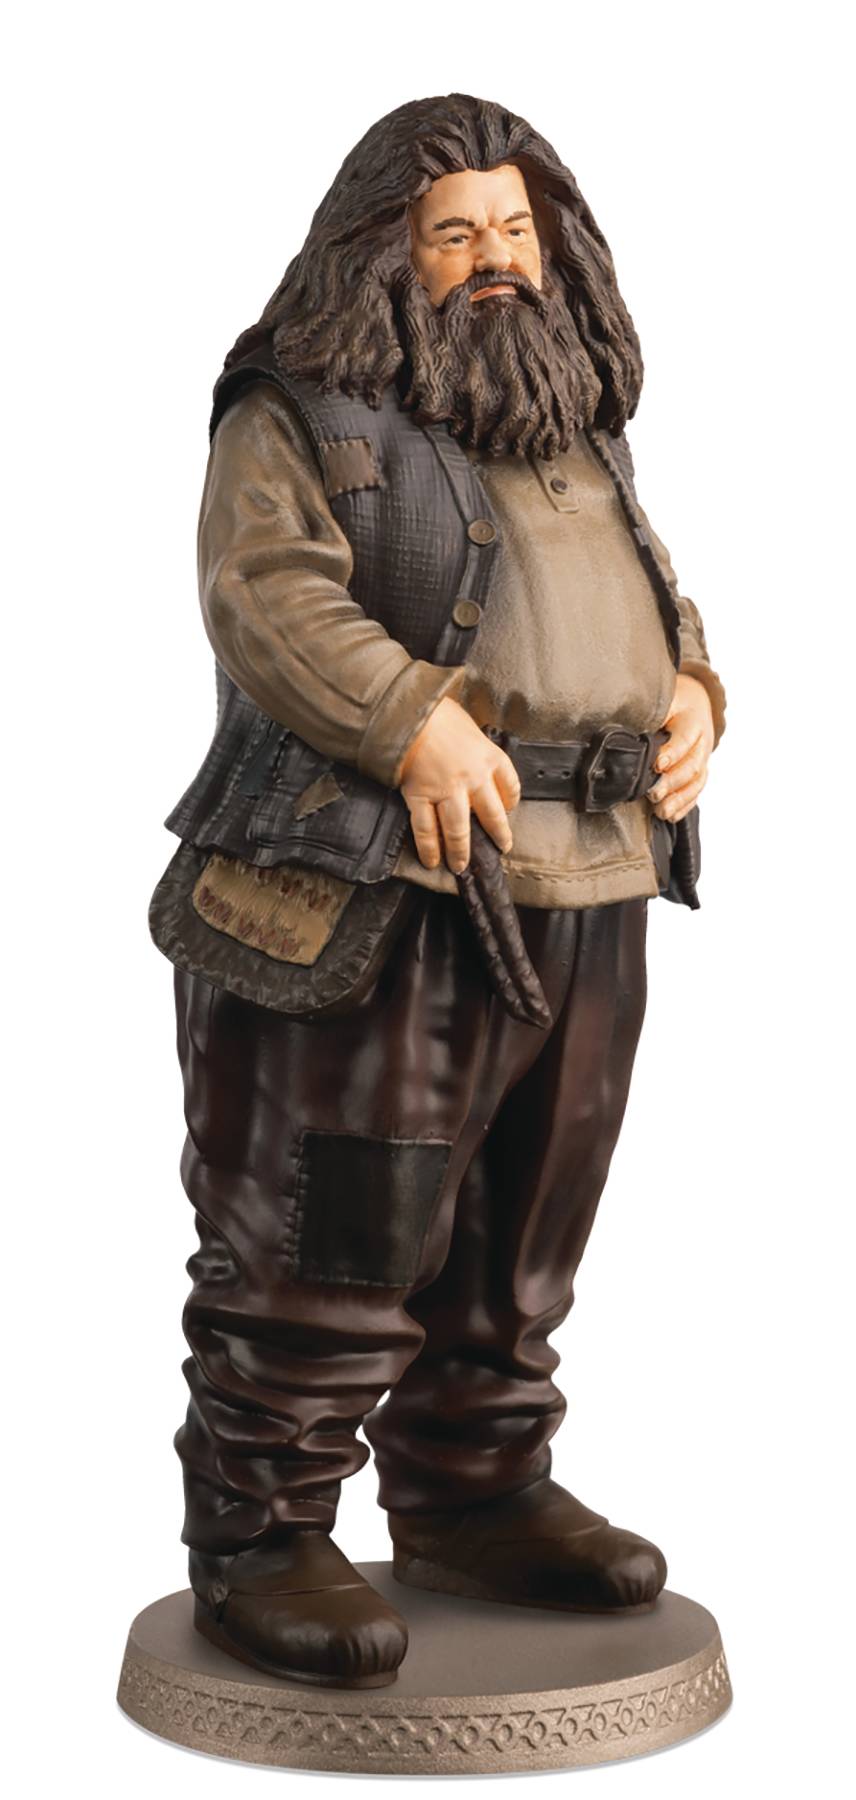 HP WIZARDING WORLD FIGURINE COLLECTION HAGRID